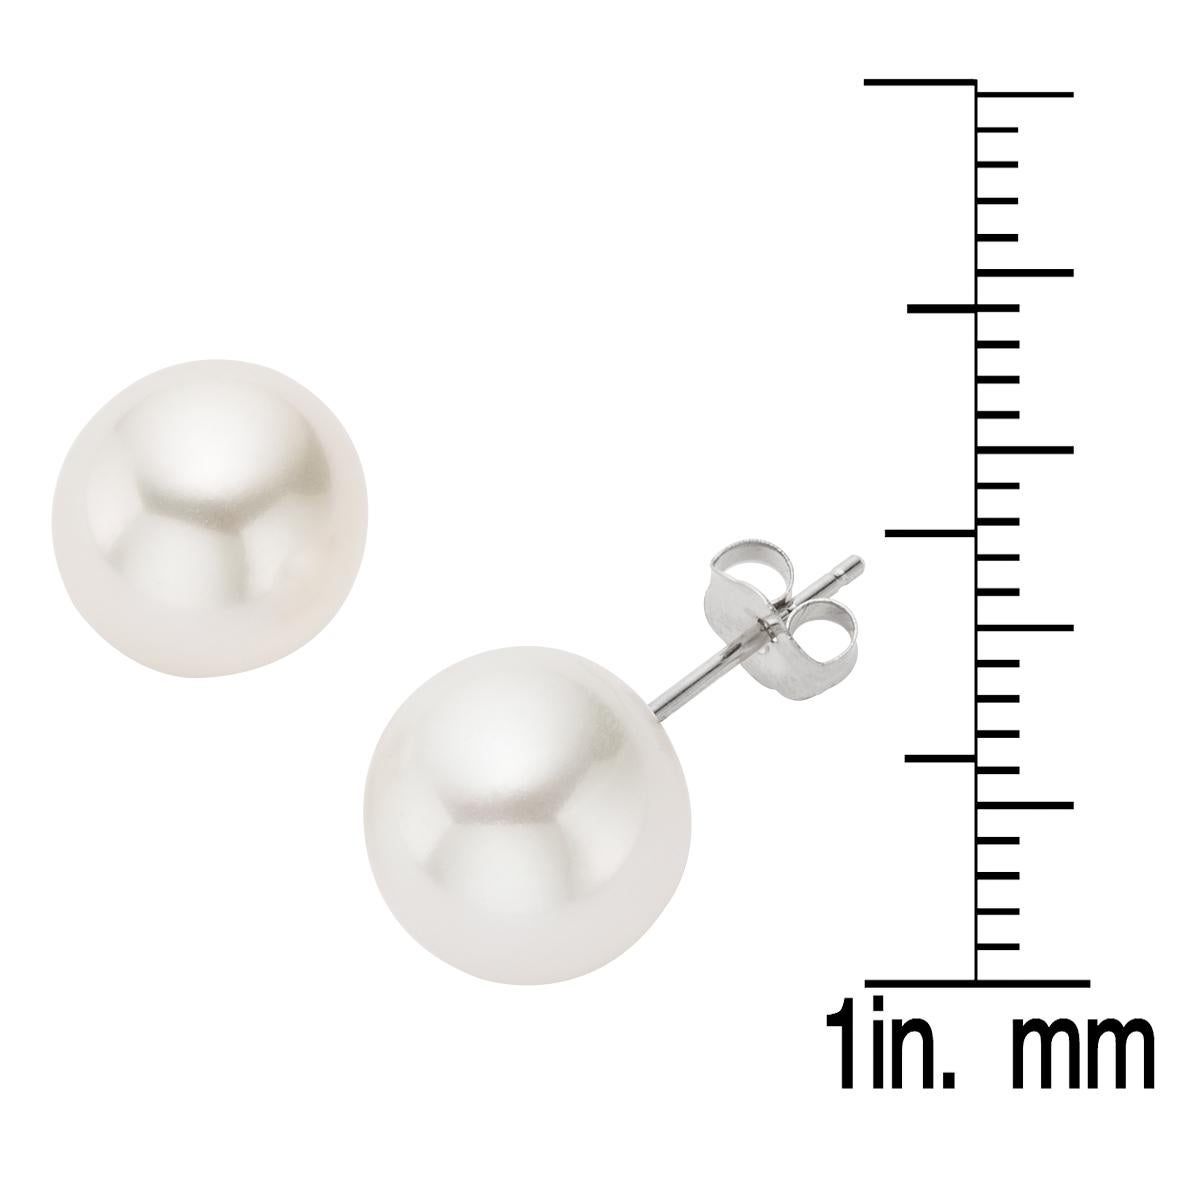 Simplicity and understated elegance have never made such a perfect combination. A beautiful pair of South Sea stud pearls set on 14K white gold backings. The pearl earrings have a 'Very High' grade luster.
Pearl Type: South Sea Cultured
Pearl